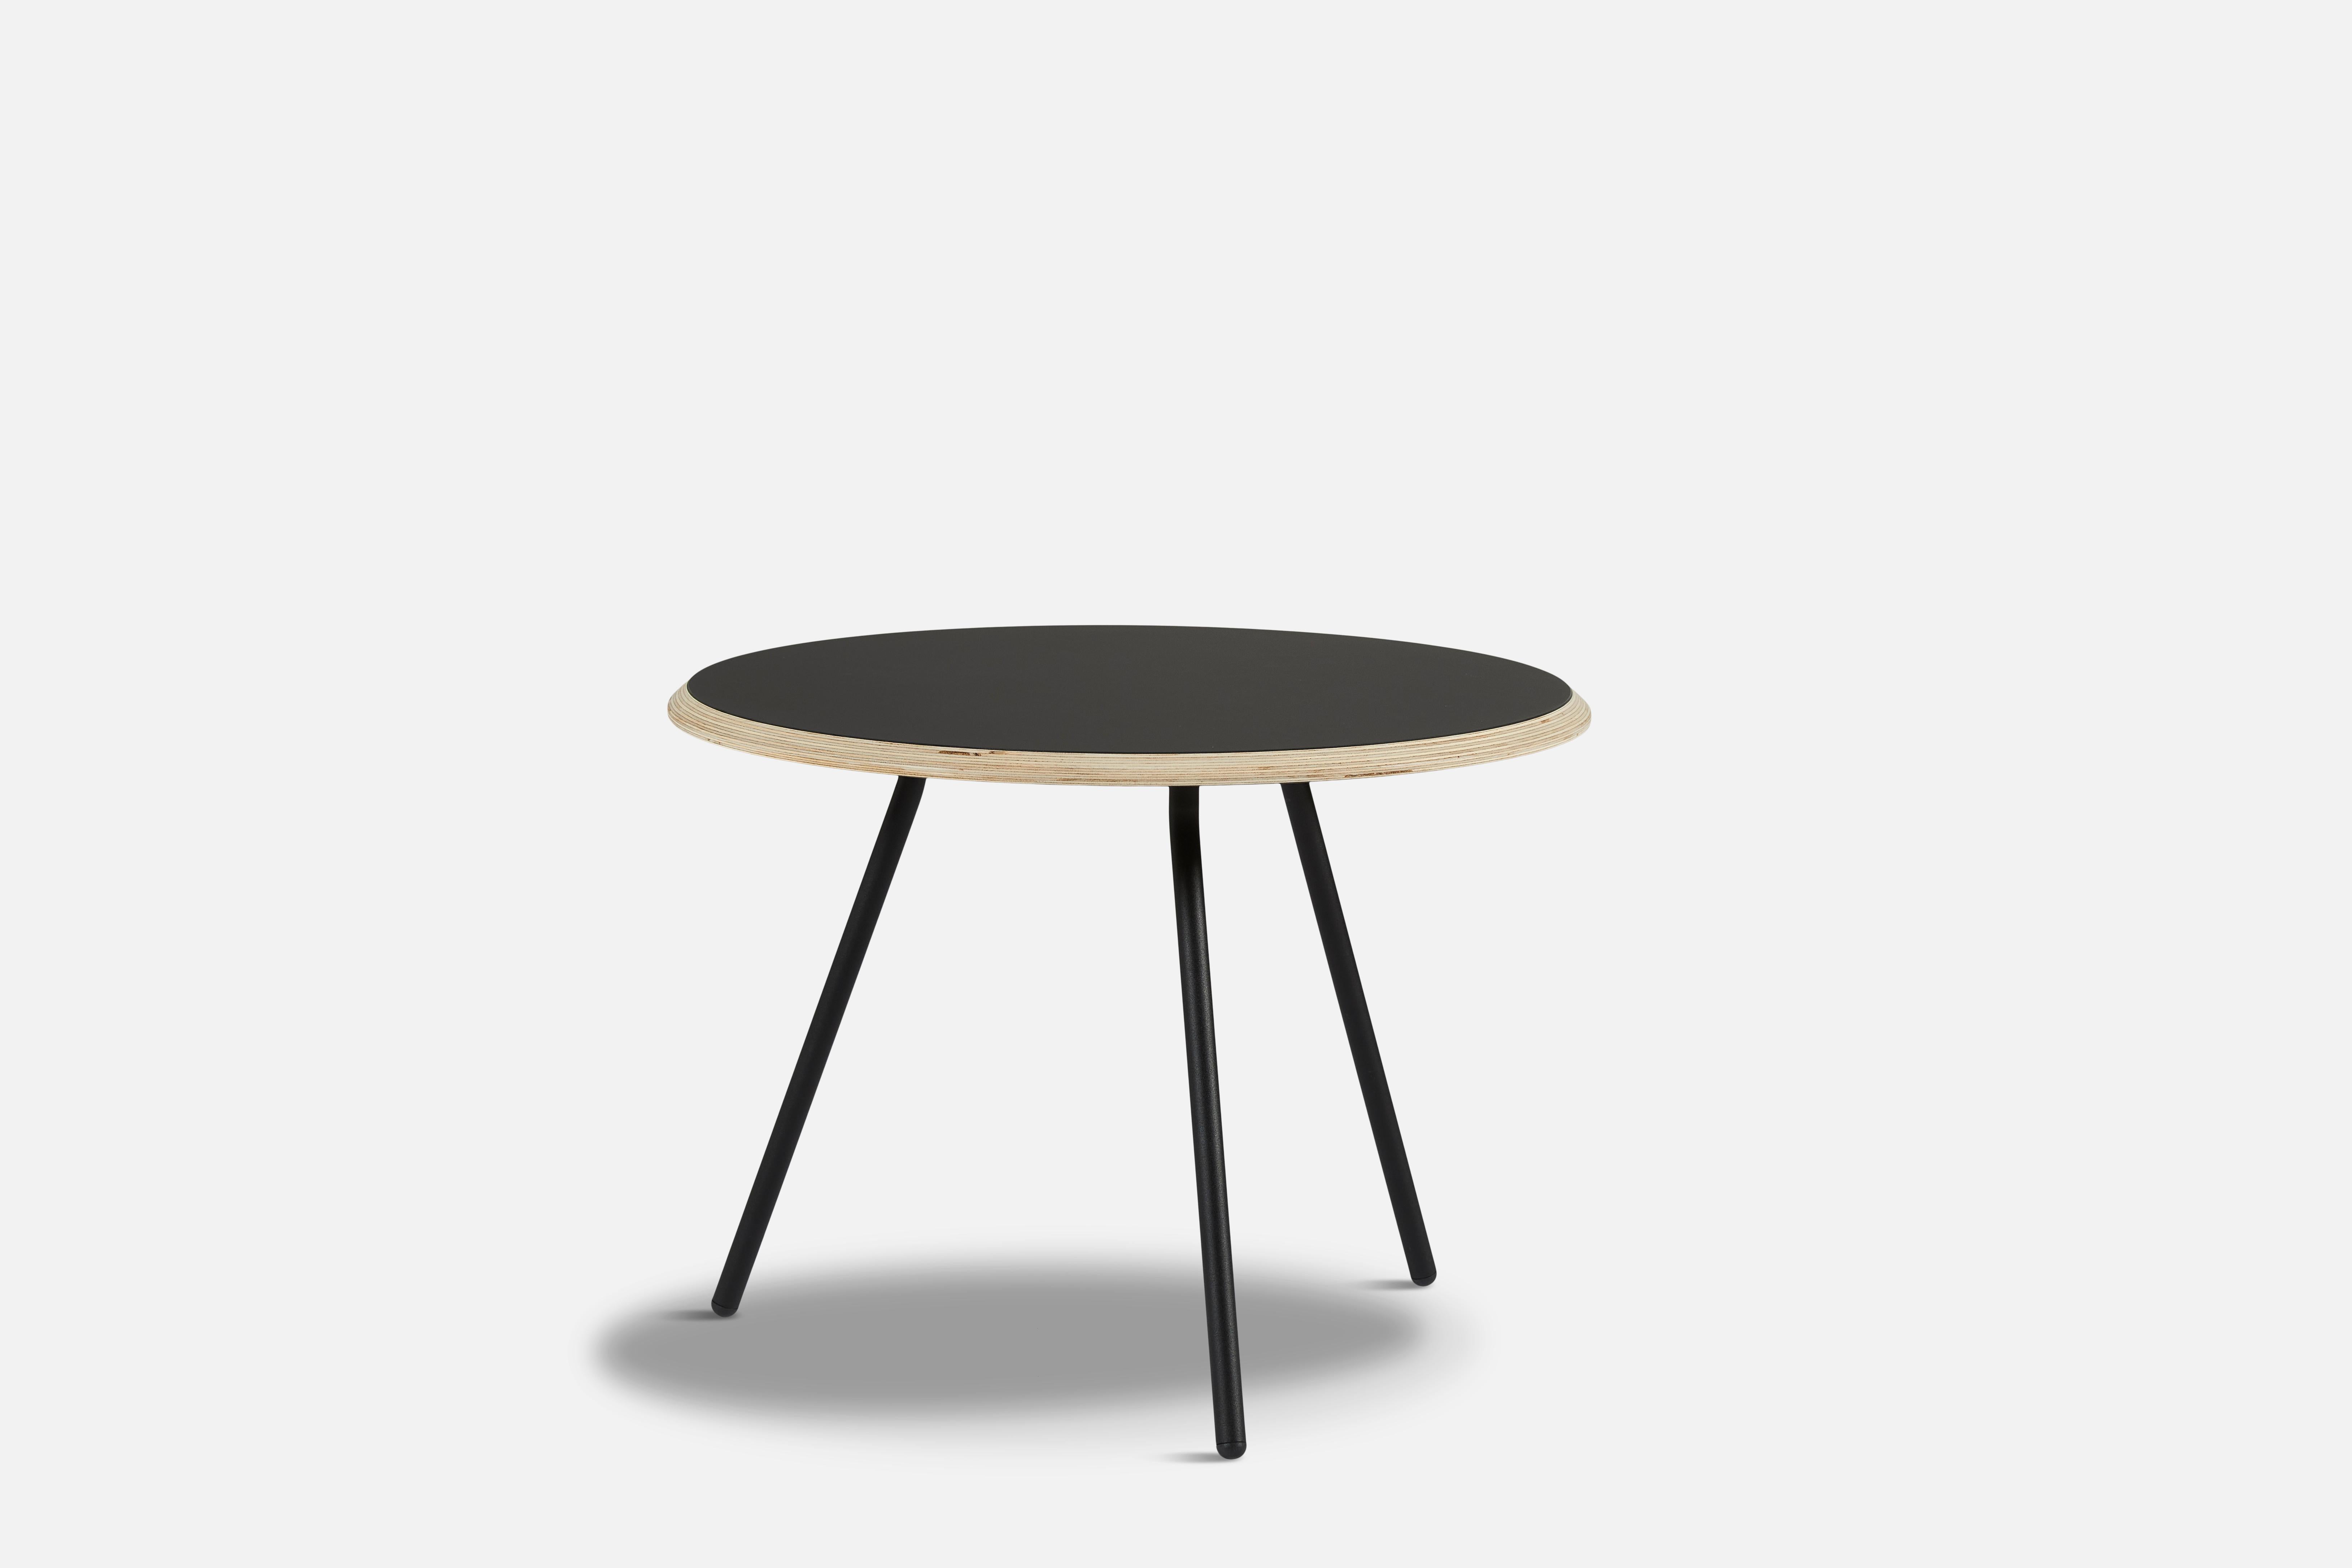 Black Fenix laminate soround coffee table 75 by Nur Design
Materials: metal, fenix laminate
Dimensions: D 75 x W 75 x H 49 cm
Also available in different sizes. 

The founders, Mia and Torben Koed, decided to put their 30 years of experience